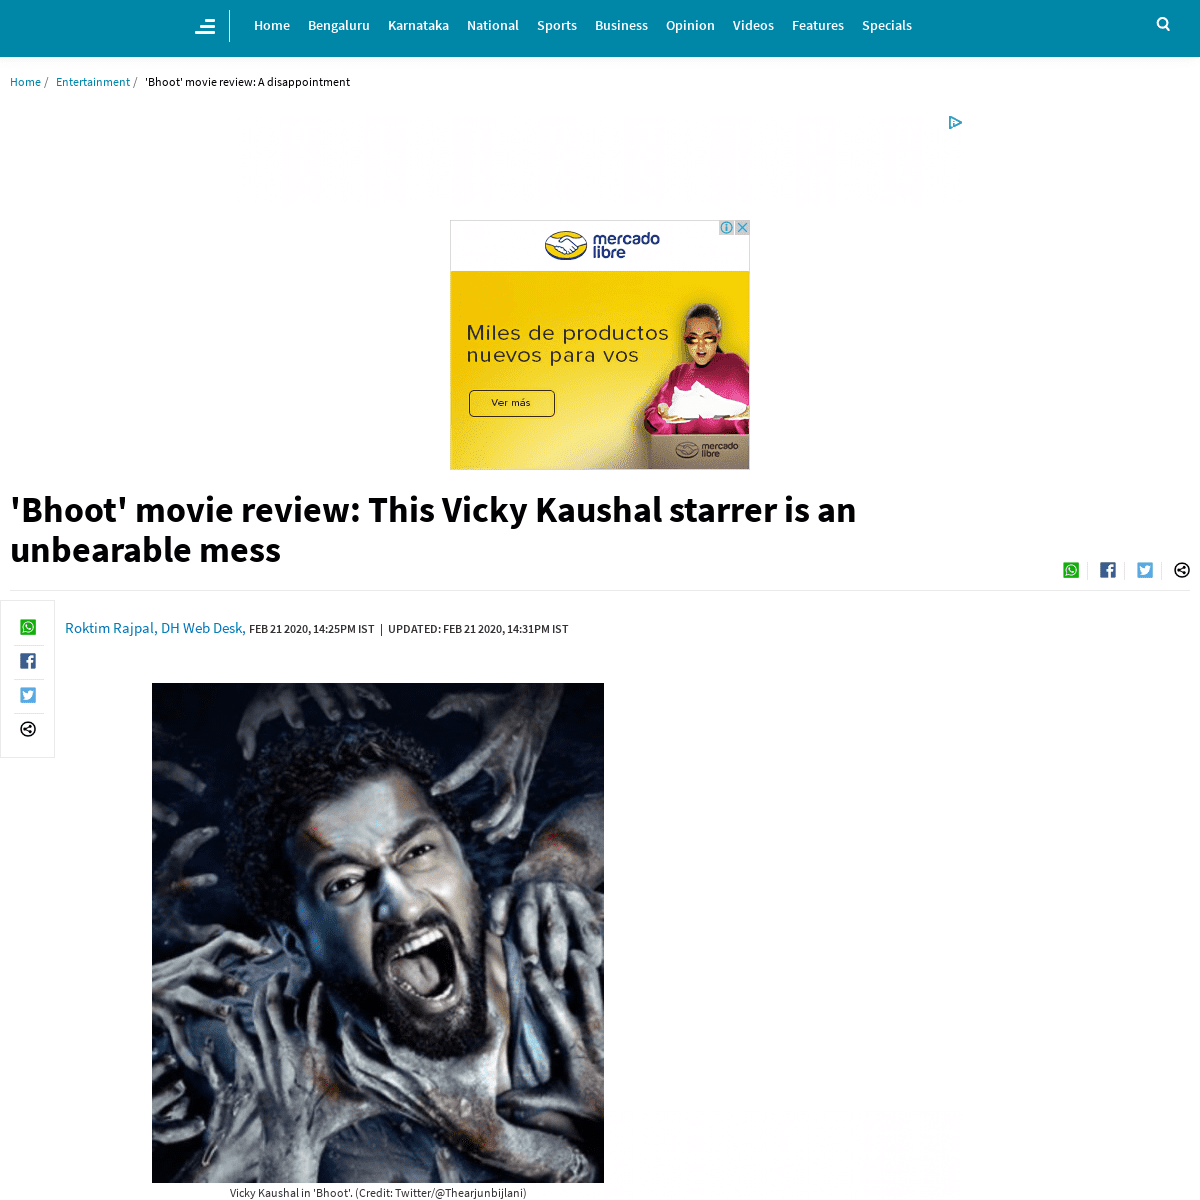 A complete backup of www.deccanherald.com/entertainment/bhoot-movie-review-this-vicky-kaushal-starrer-is-an-unbearable-mess-8067